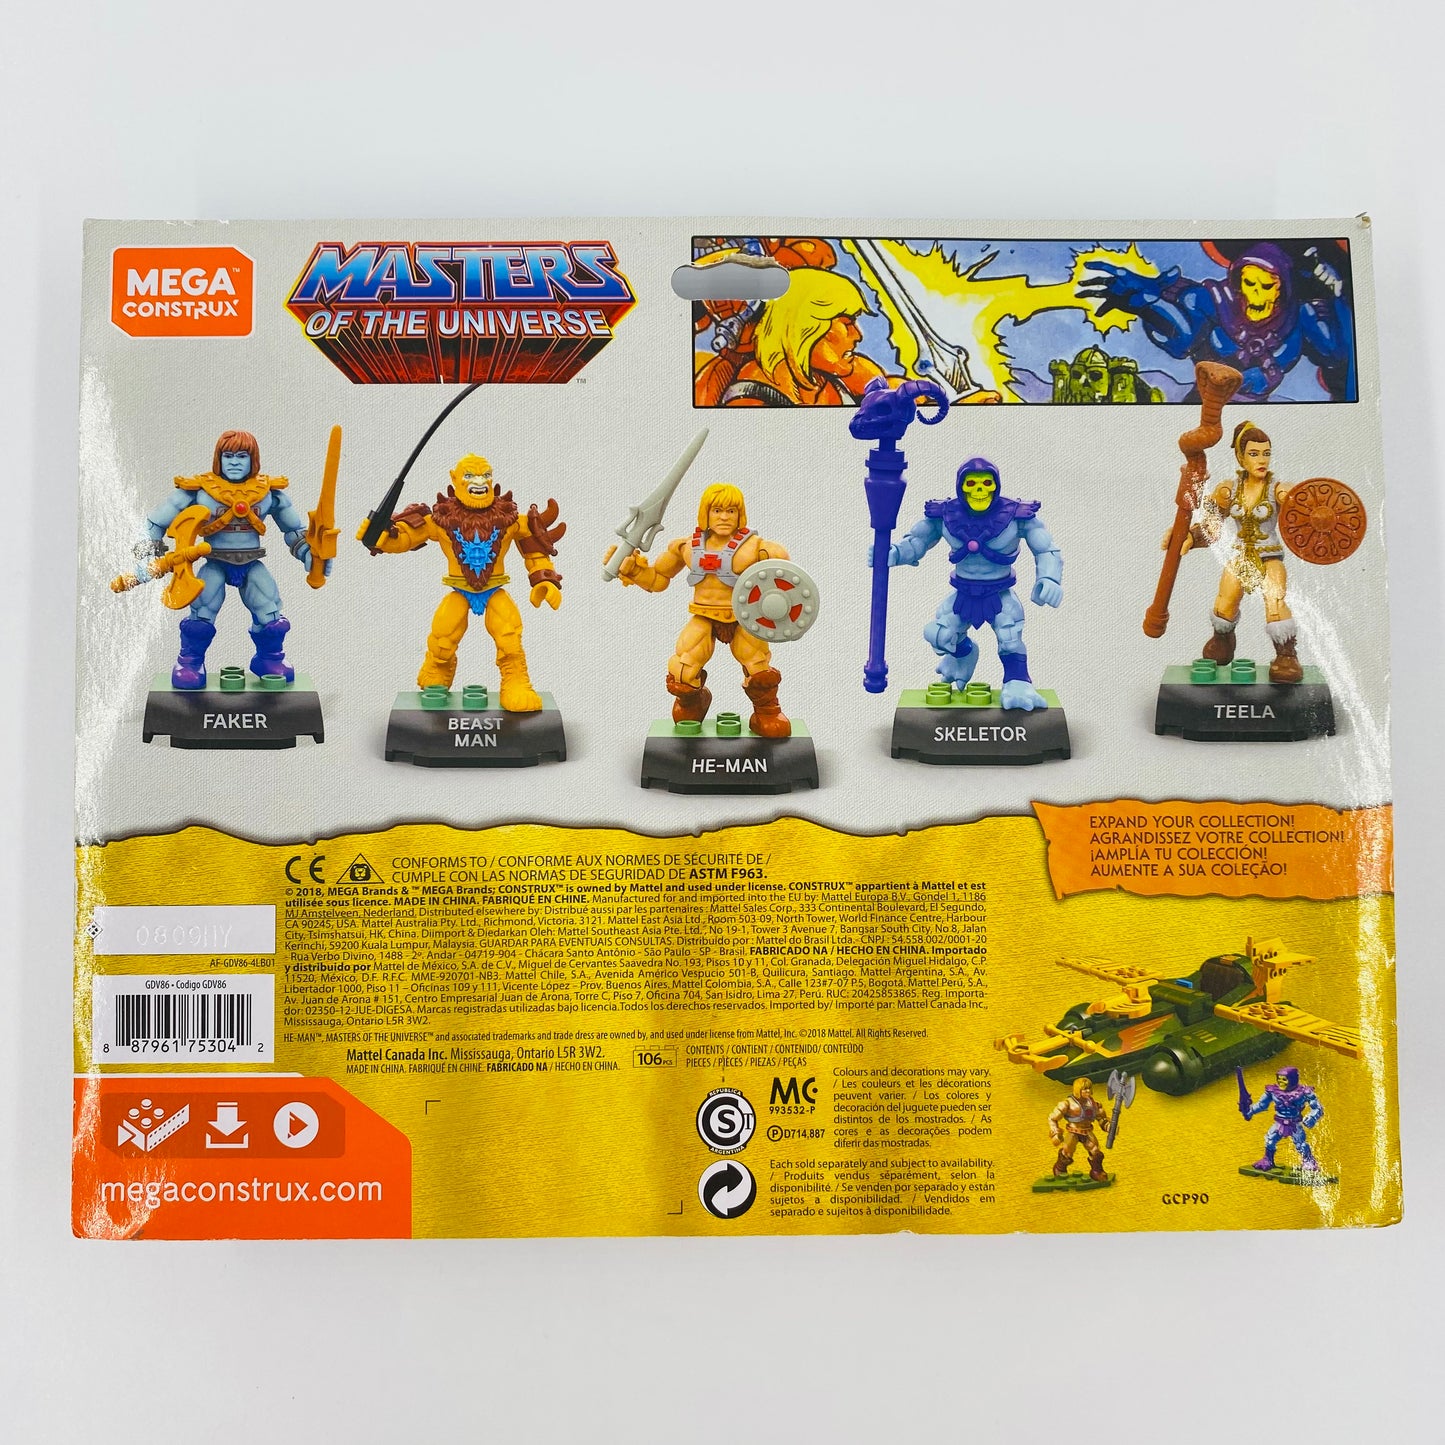 Mega Construx Masters of the Universe Battle For Eternia Collection with Faker, Beast Man, He-Man, Skeletor & Teela carded 2” micro action figures (2019) GDV86 Mattel